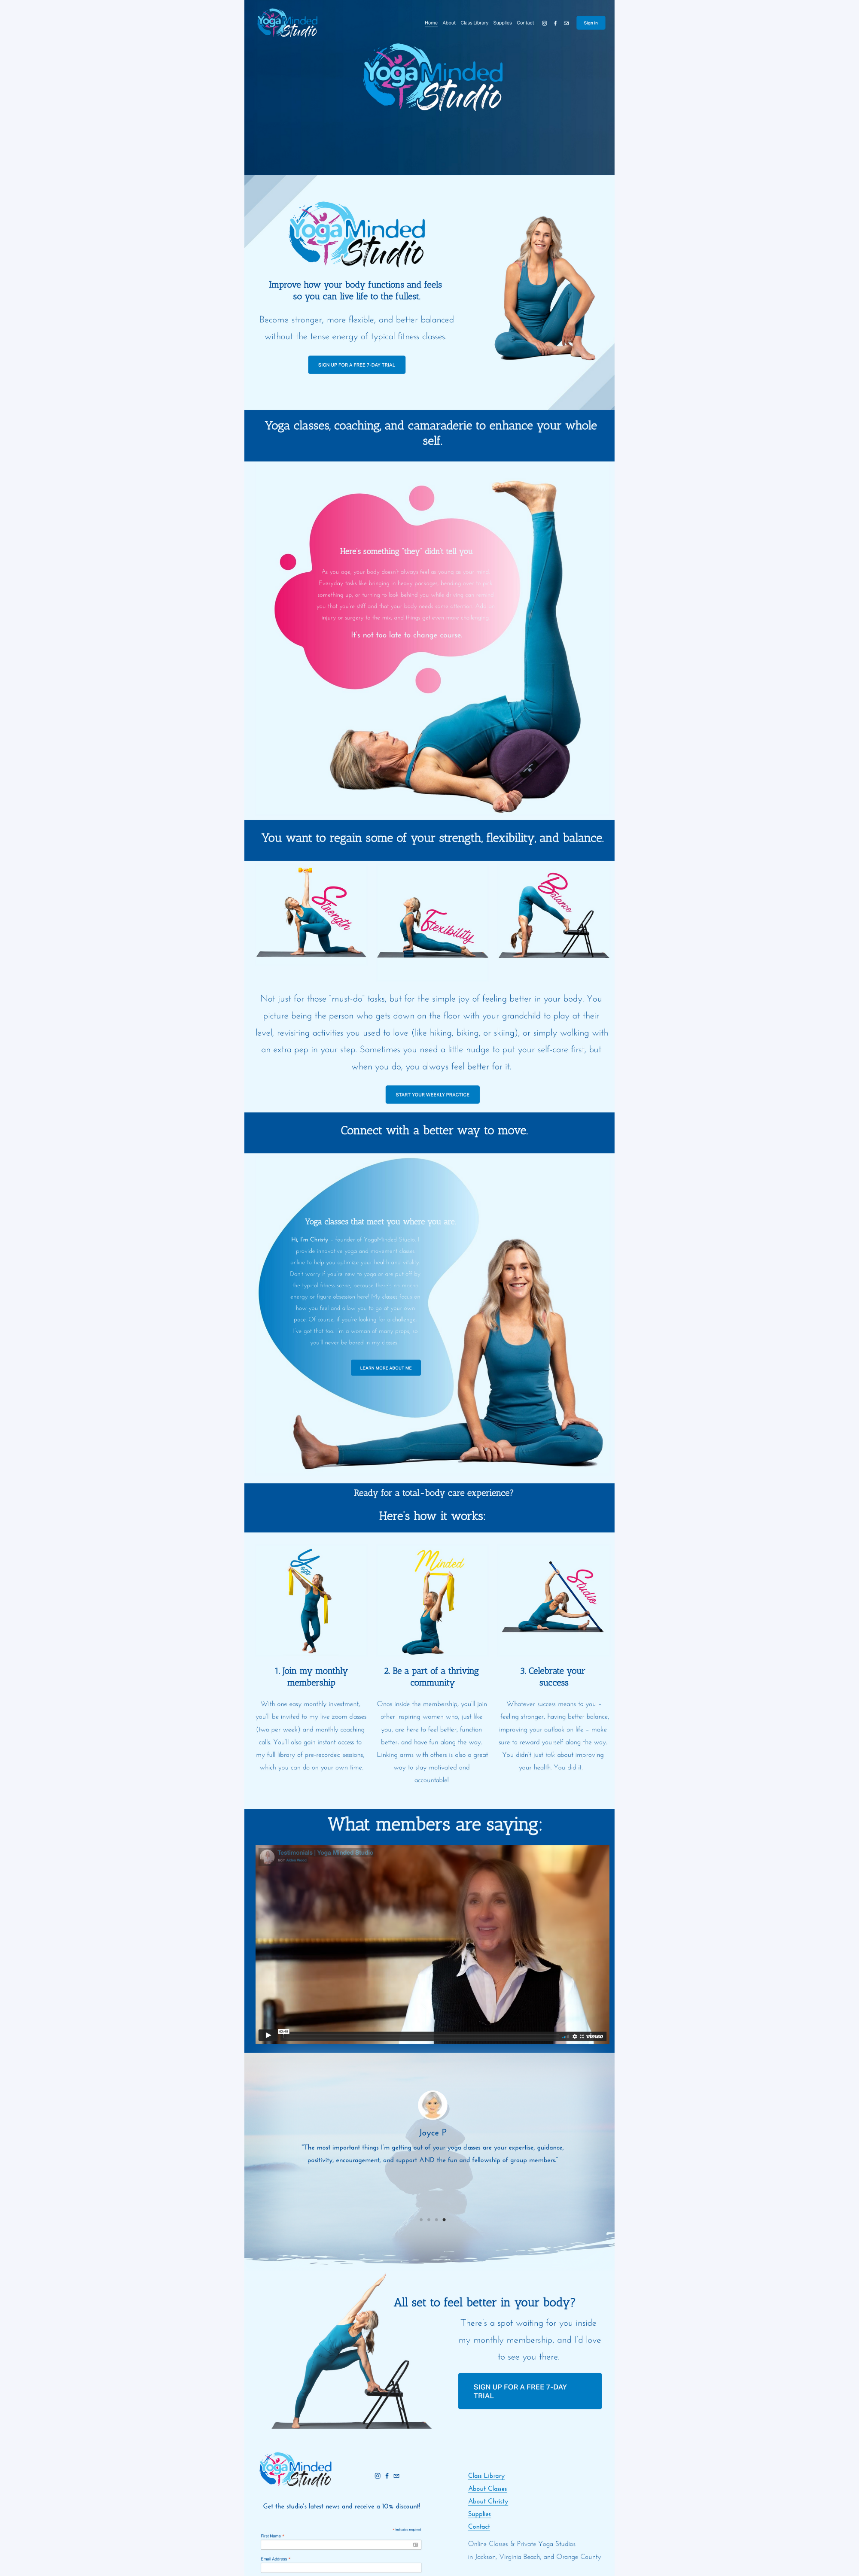 Page 2 - Free and customizable yoga templates